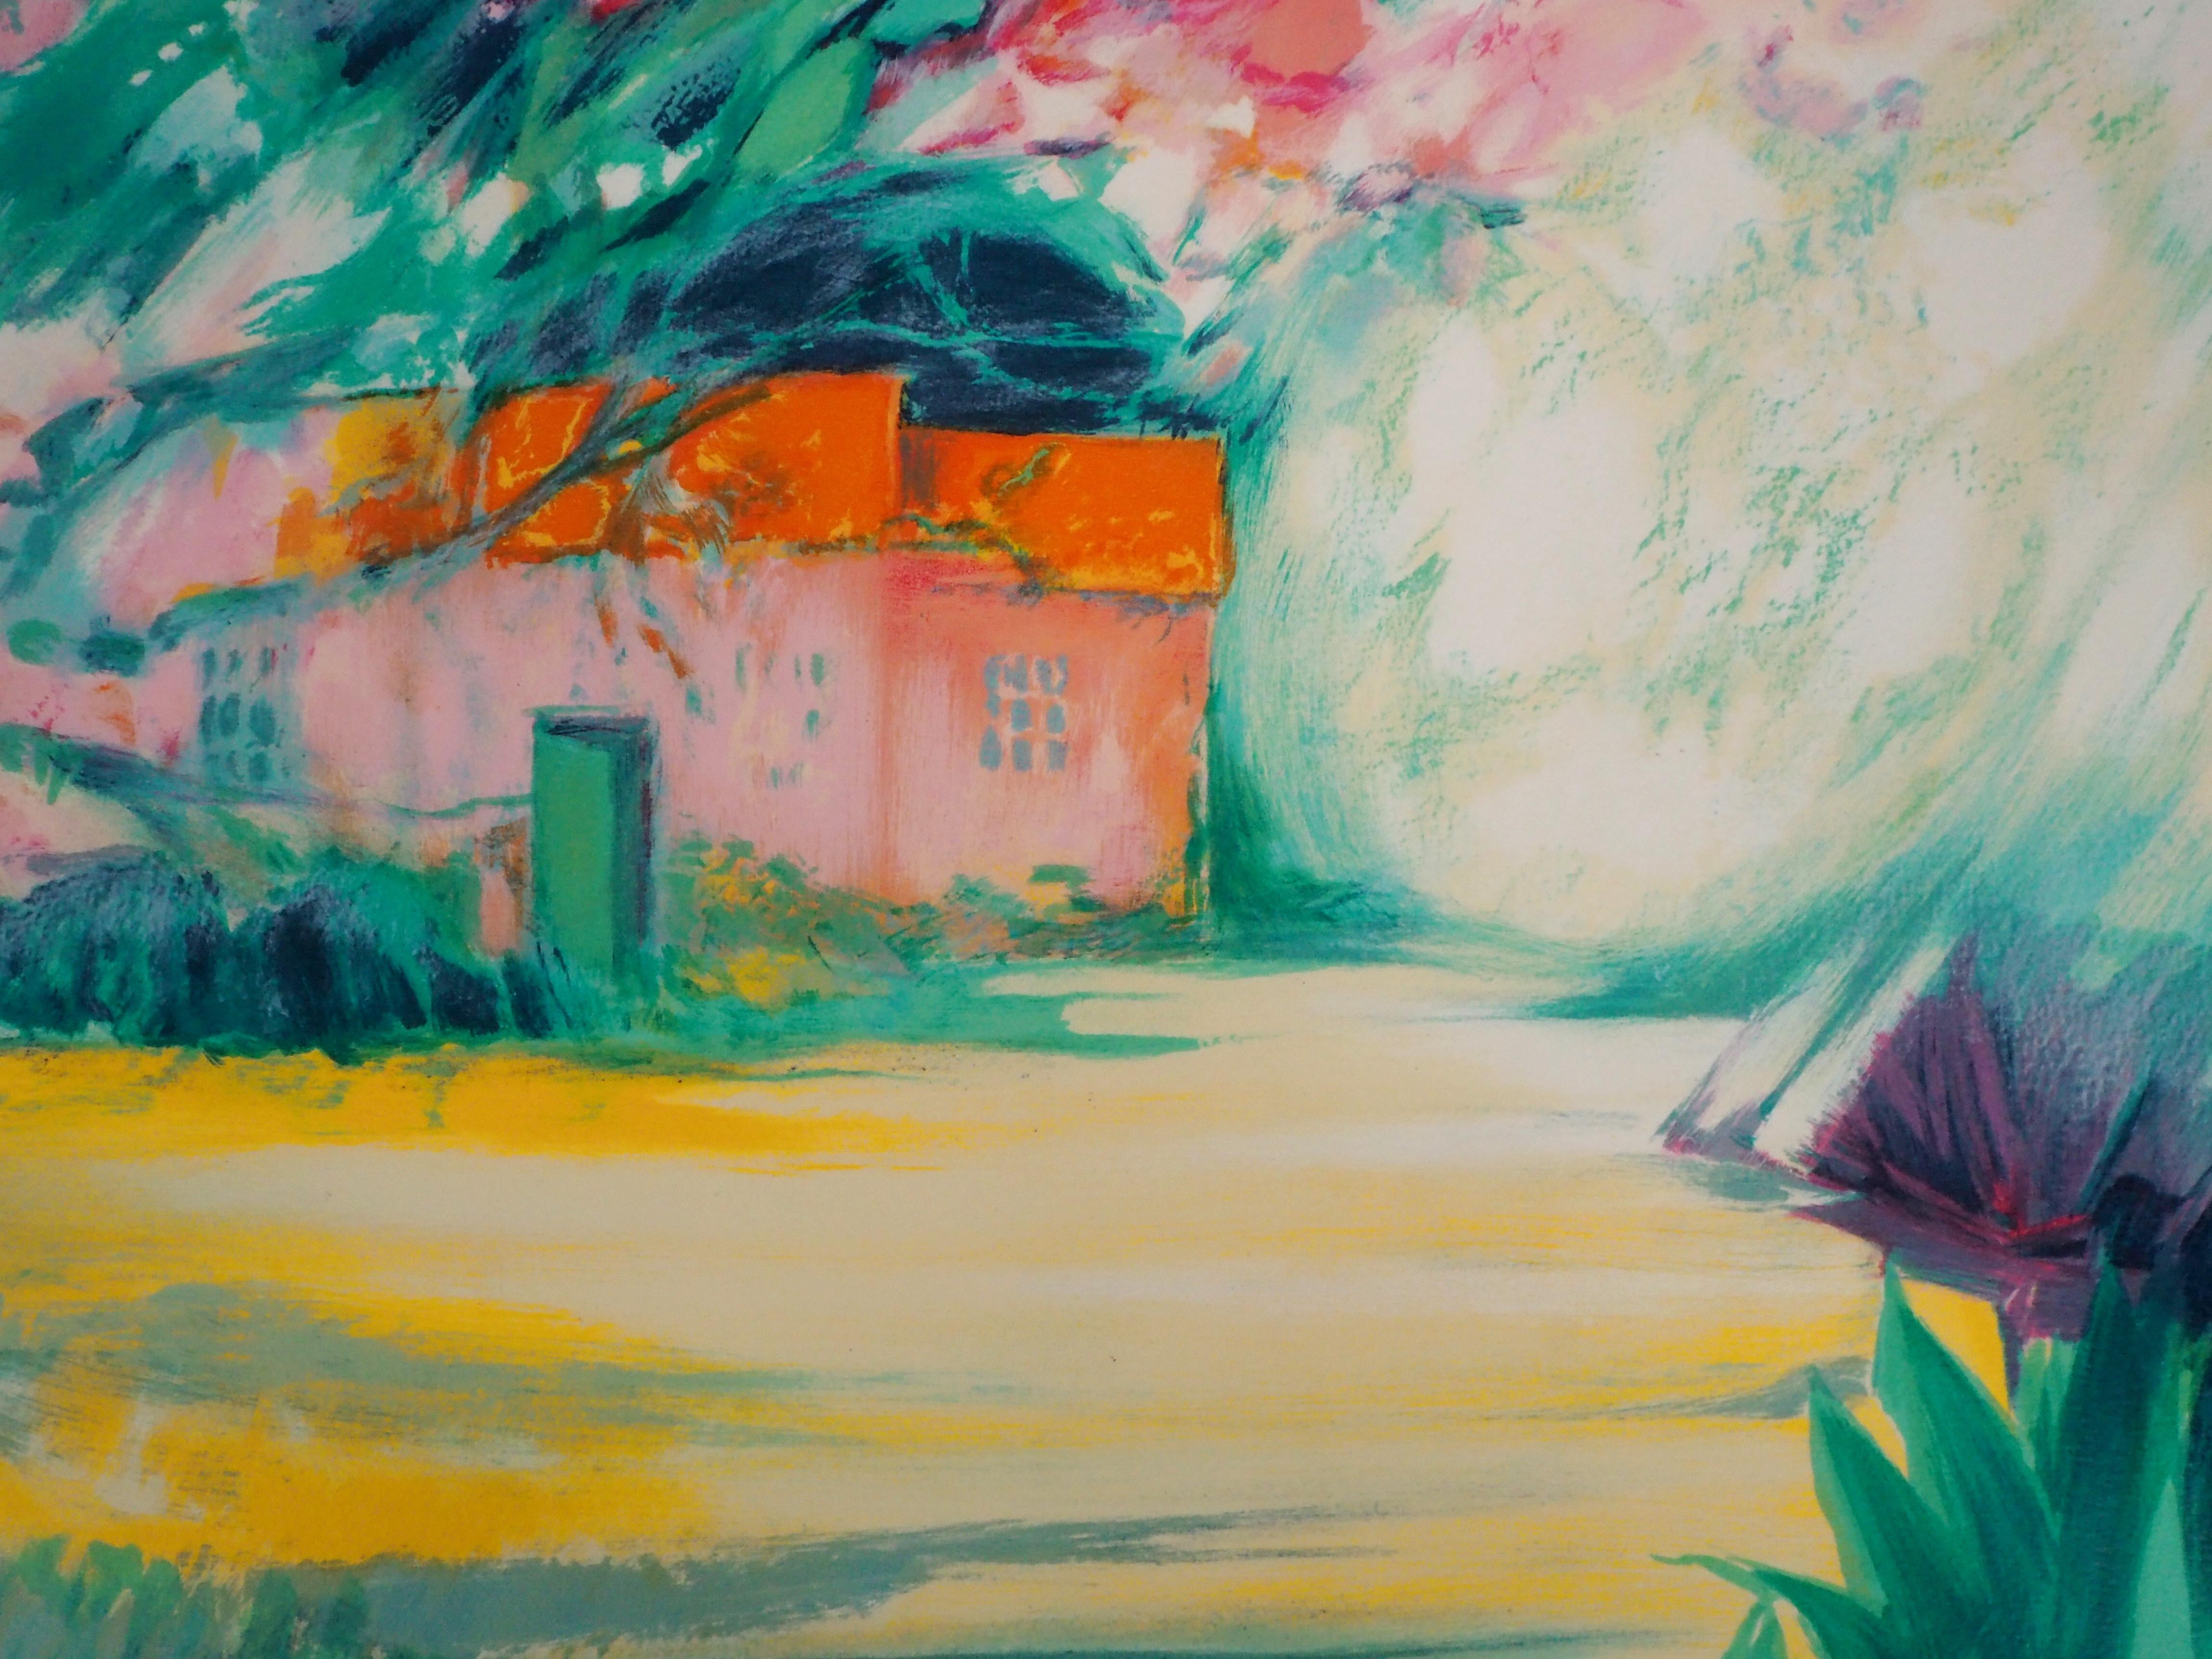  Tribute to Monet and Giverny, The Pink House - Original Lithograph, Handsigned  - Brown Landscape Print by Claude Hemeret